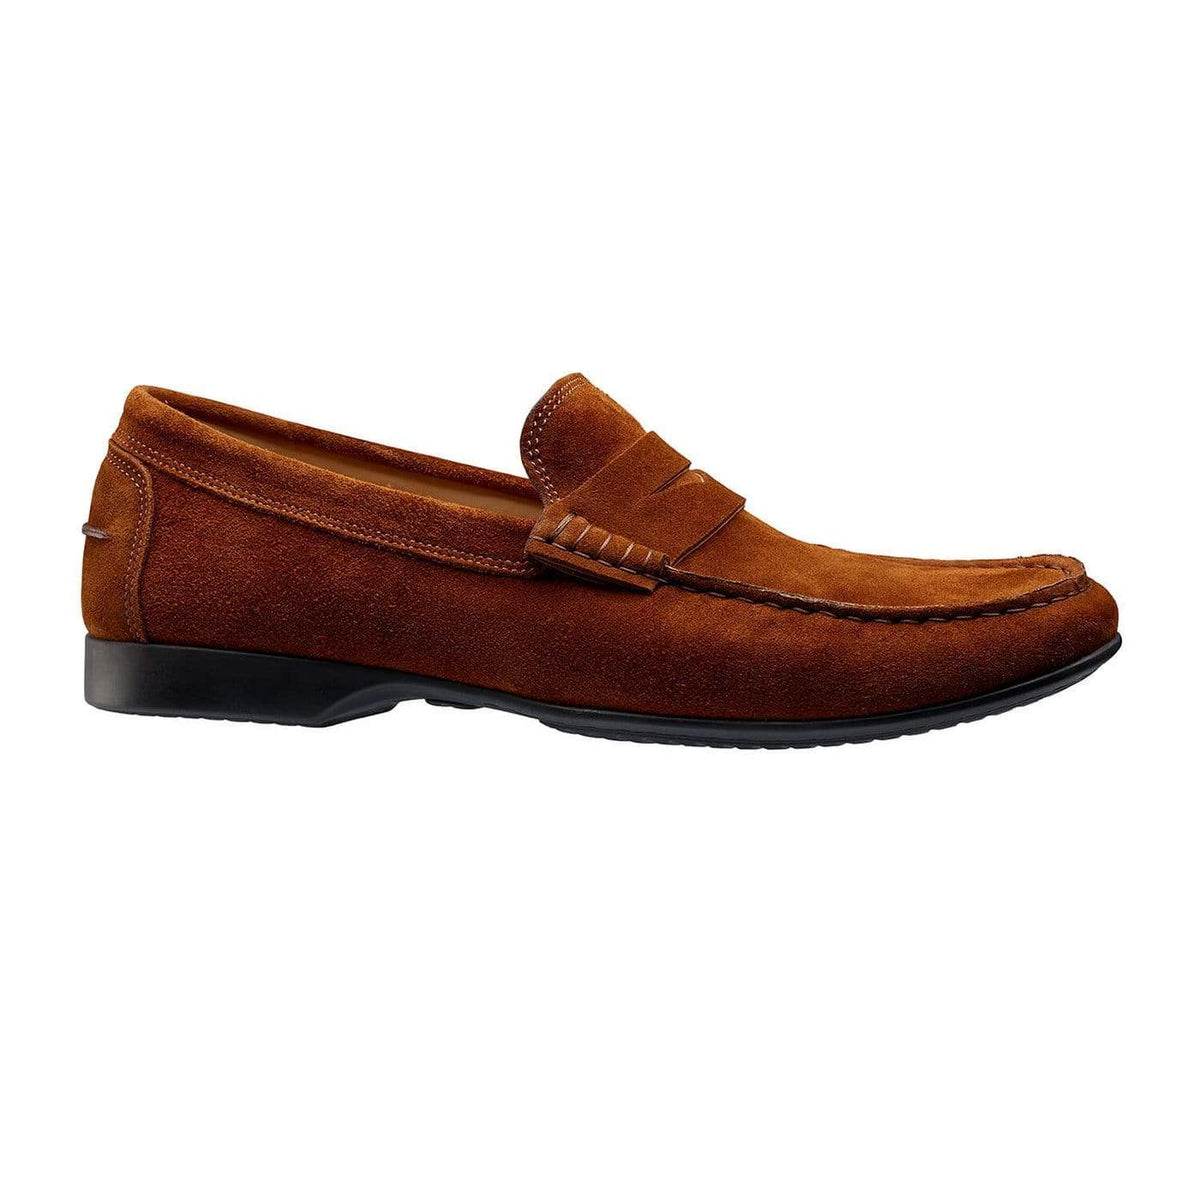 Handmade men's carshoe loafers in LEATHER red suede.